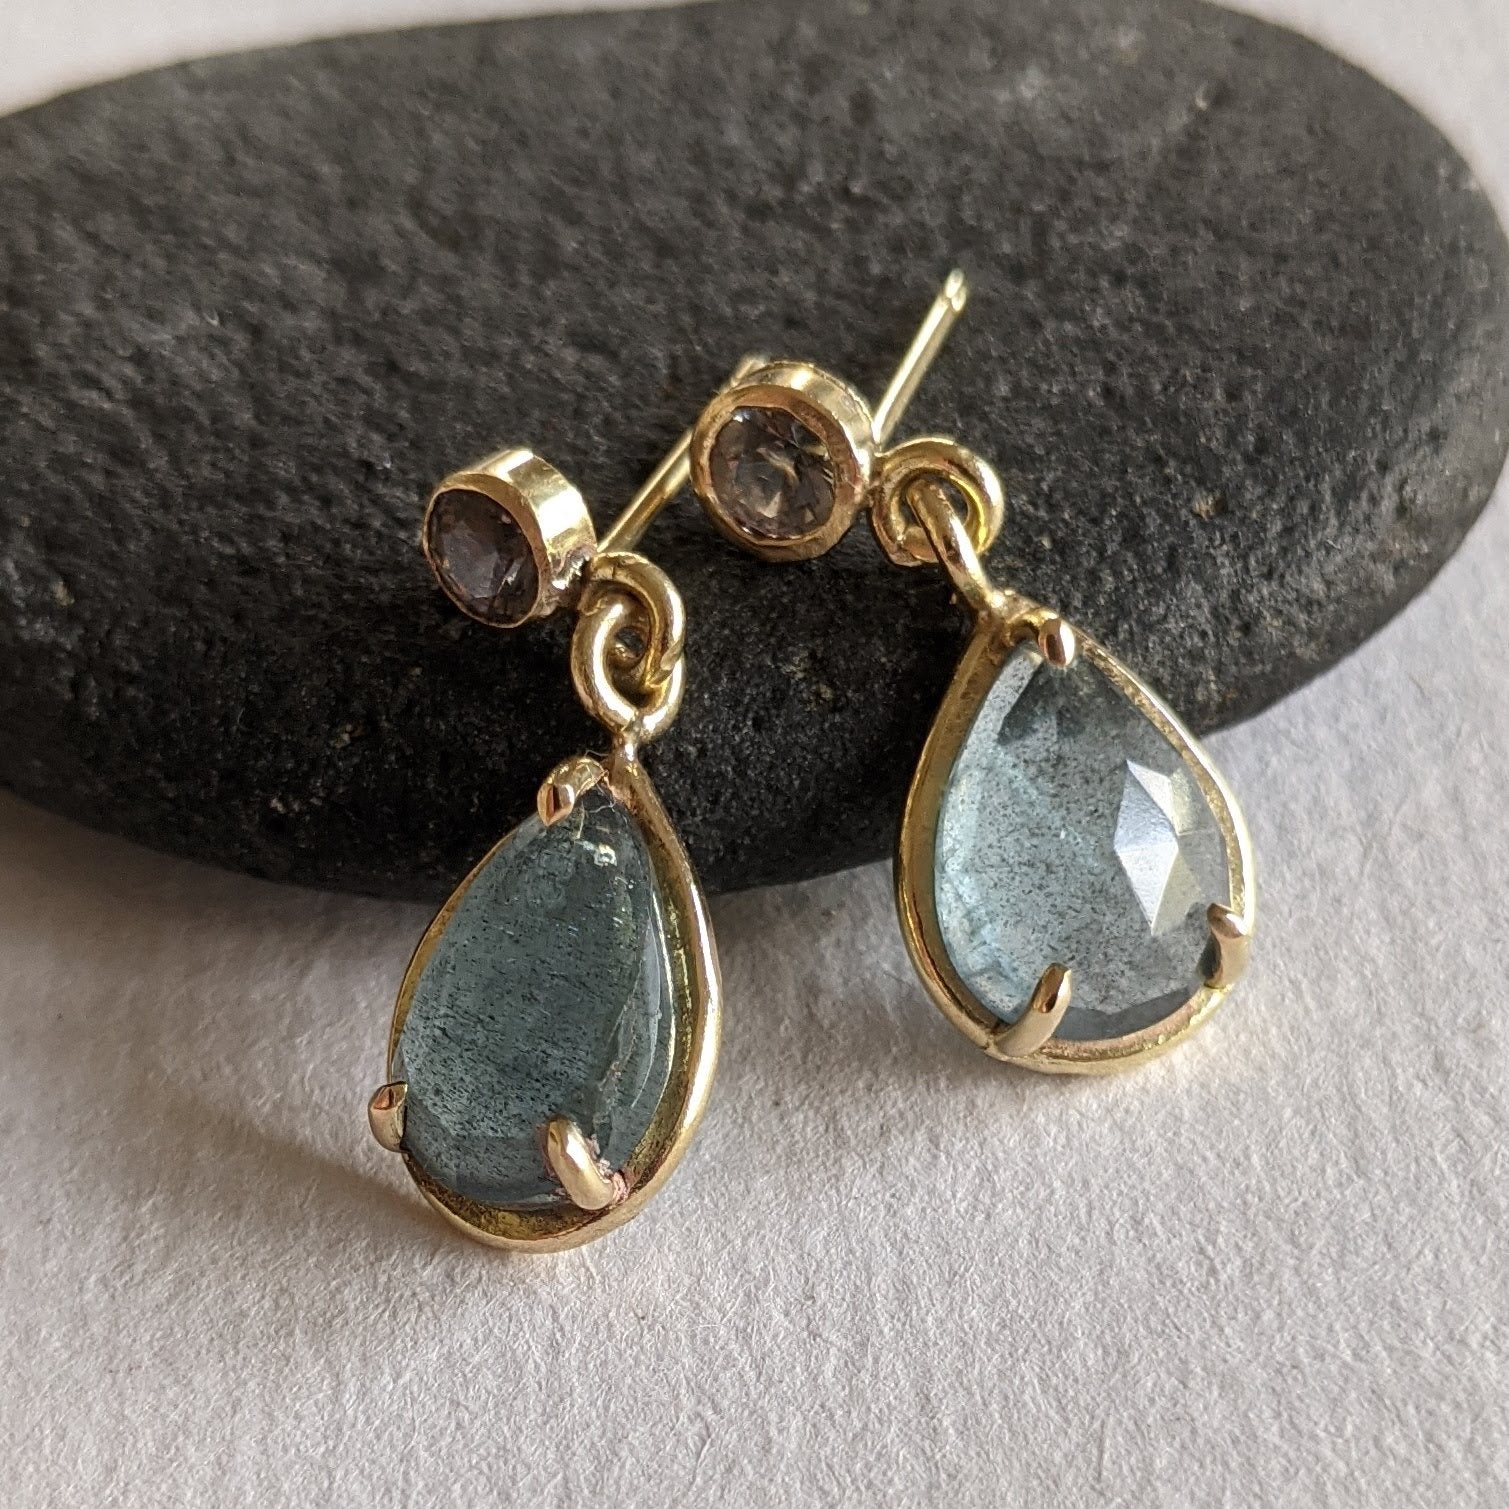 Moss Aquamarine Pear Shape with Grey Spinel in 18kt Gold Earrings